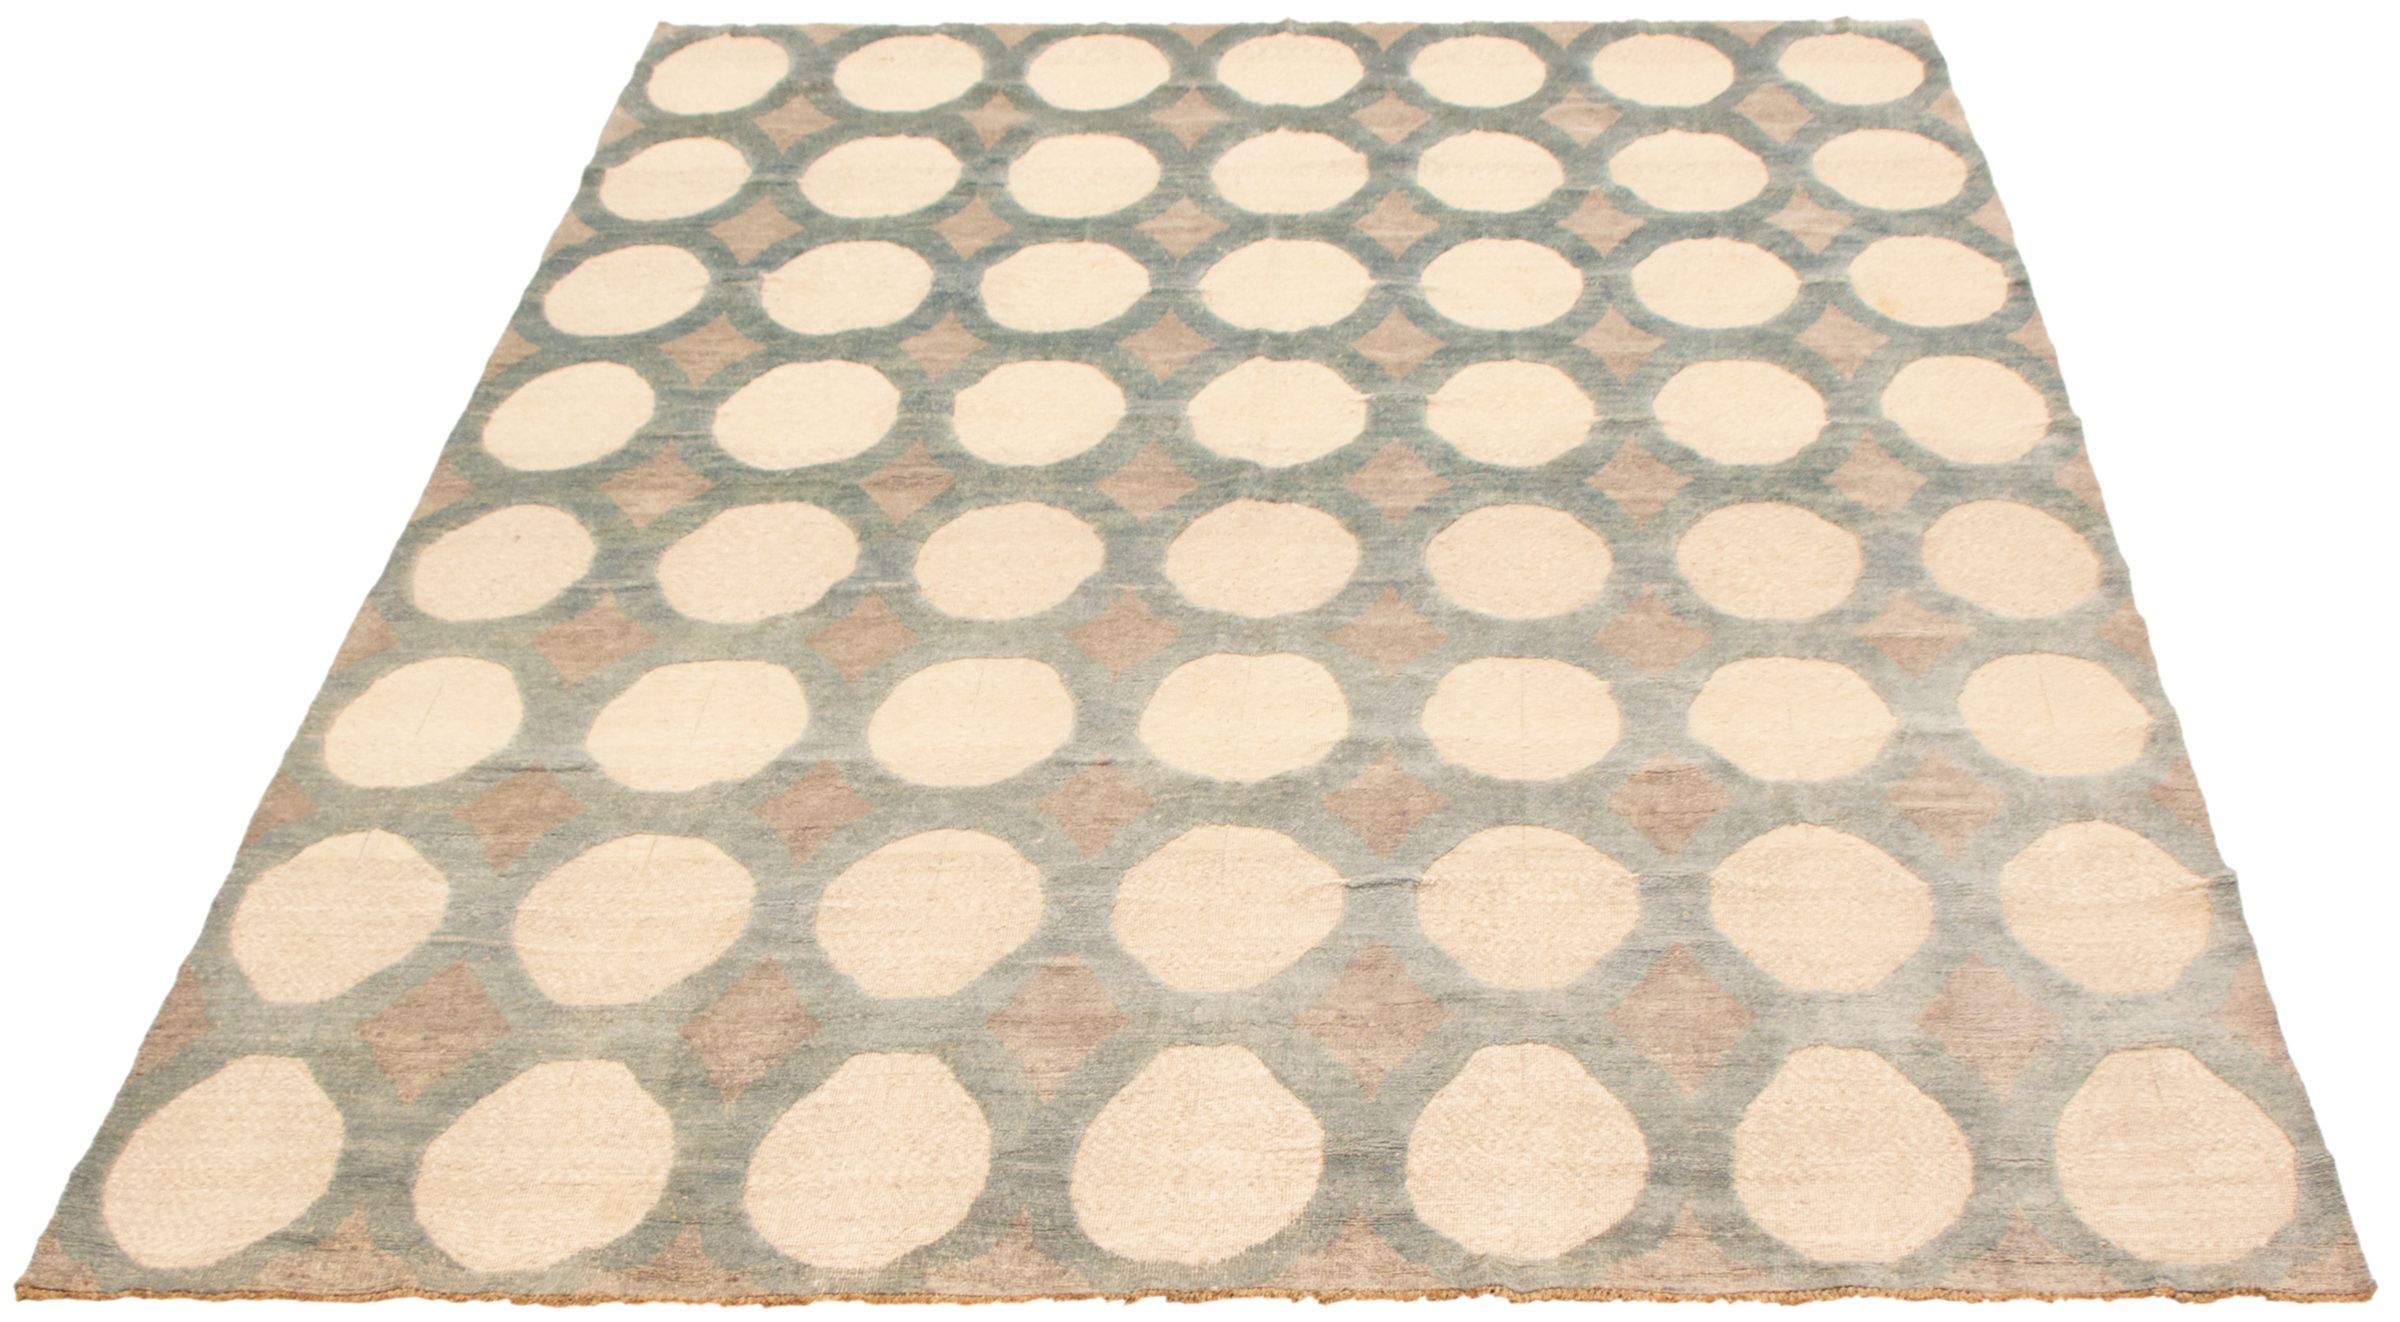 Finest Peshawar Ziegler Casual Brown Rug 8'0 x 10'0 Hand-Knotted Wool Rug 362359 eCarpet Gallery Large Area Rug for Living Room Bedroom 